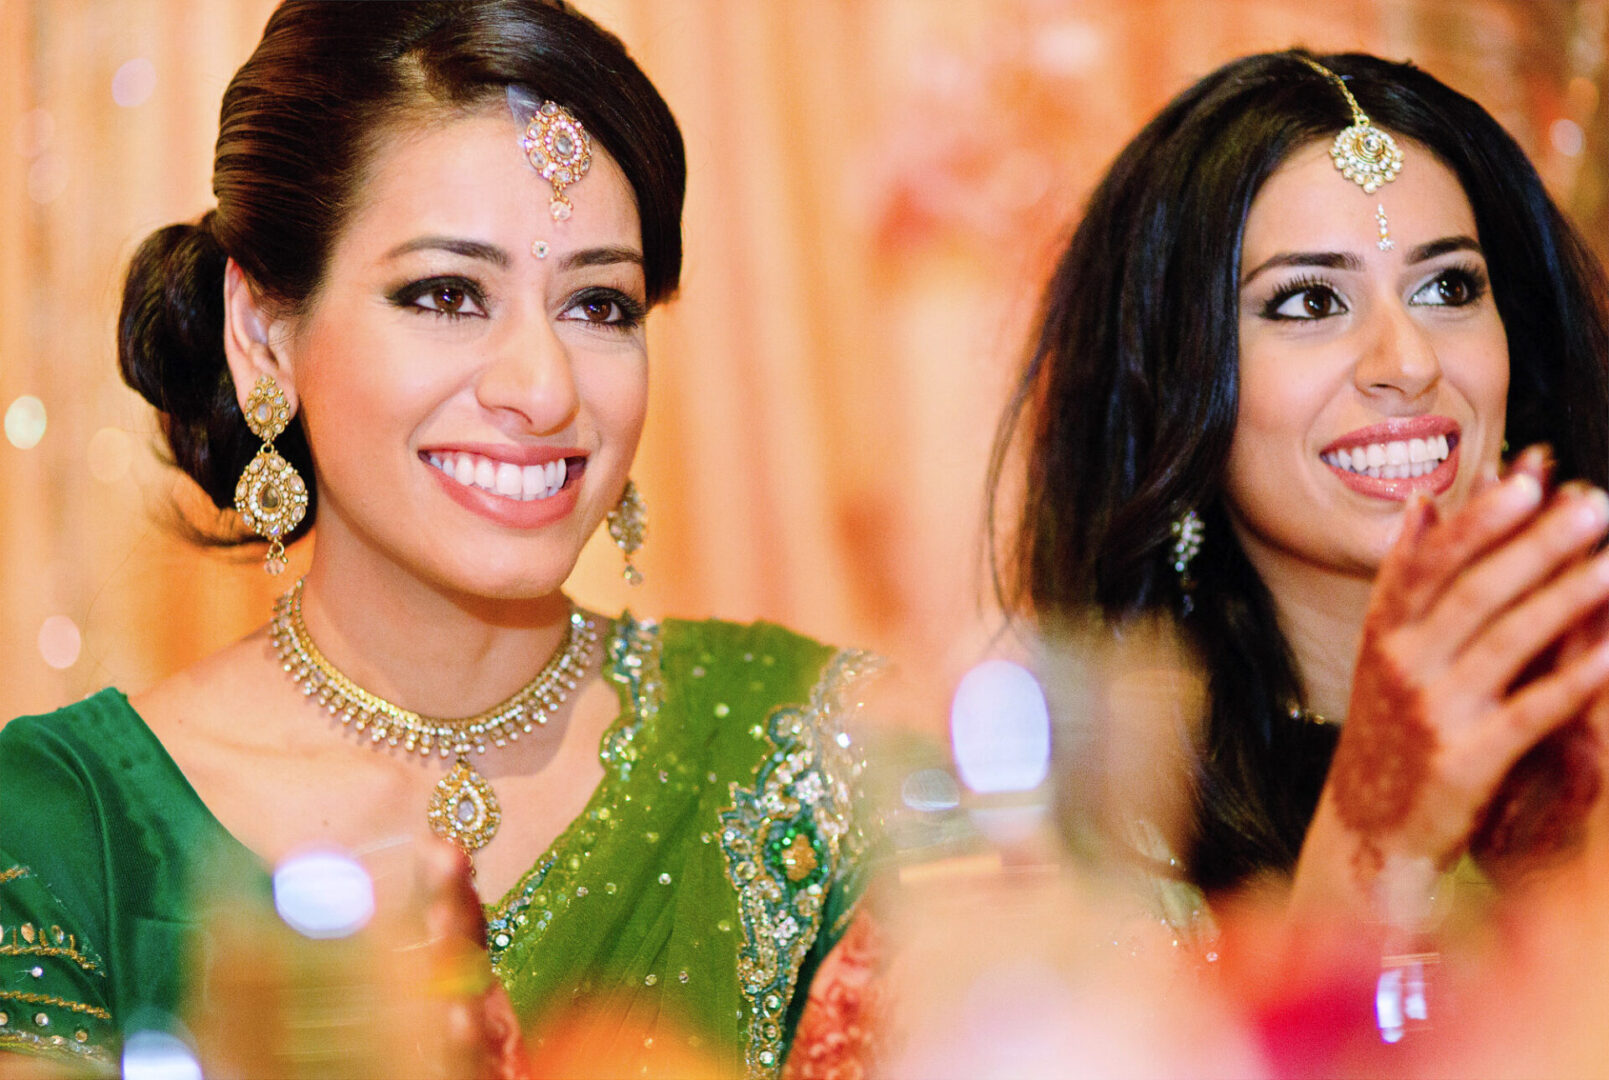 Close up image of two ladies smiling at the camera